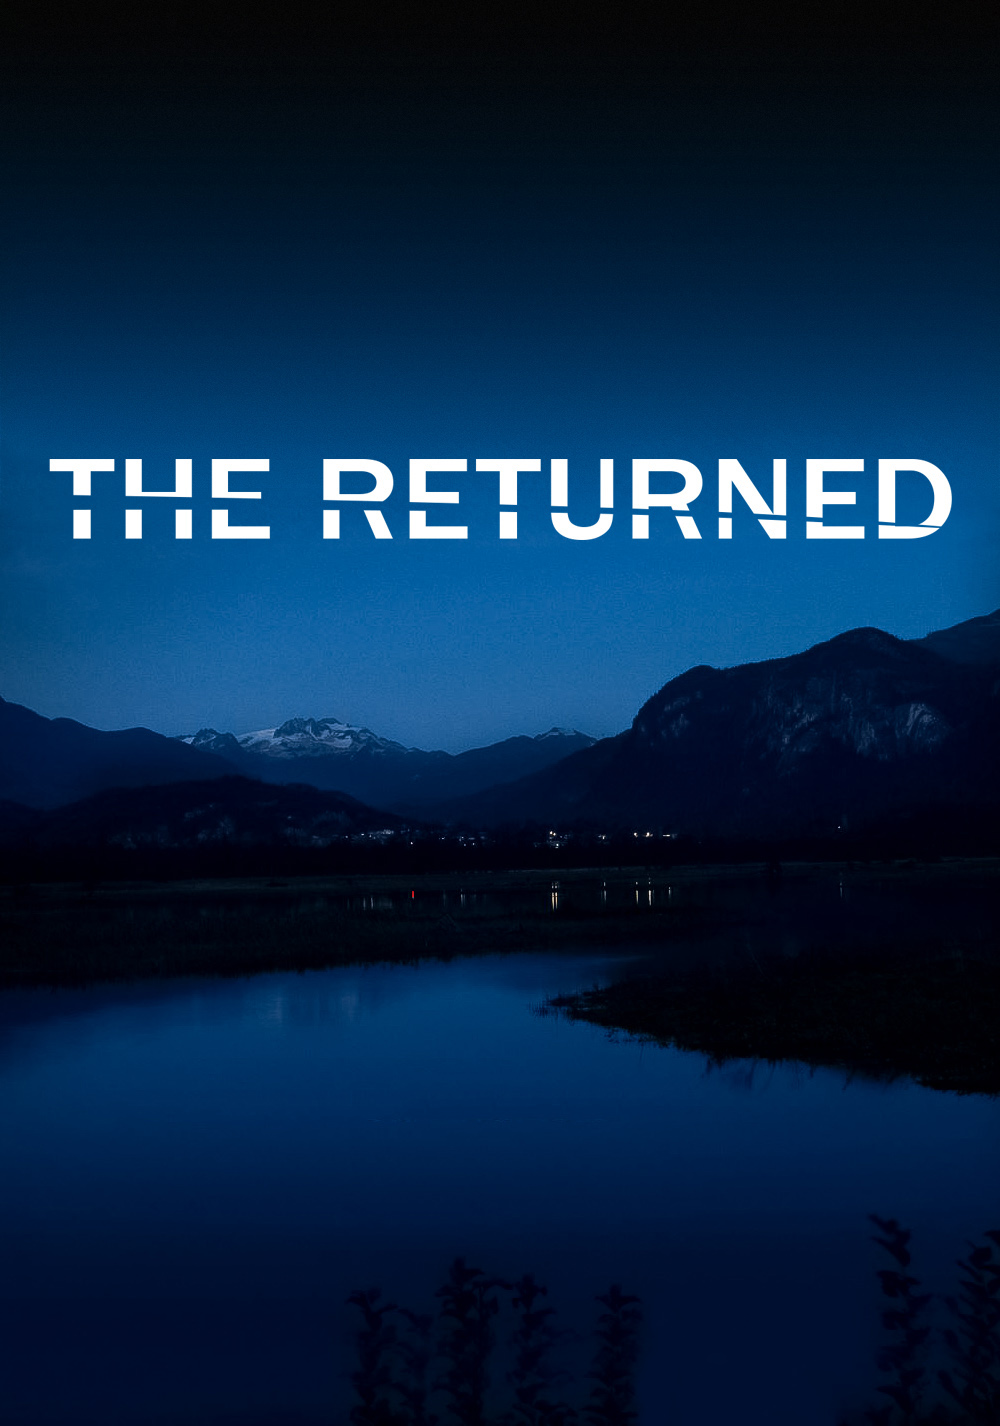 The Returned (Us) Wallpapers